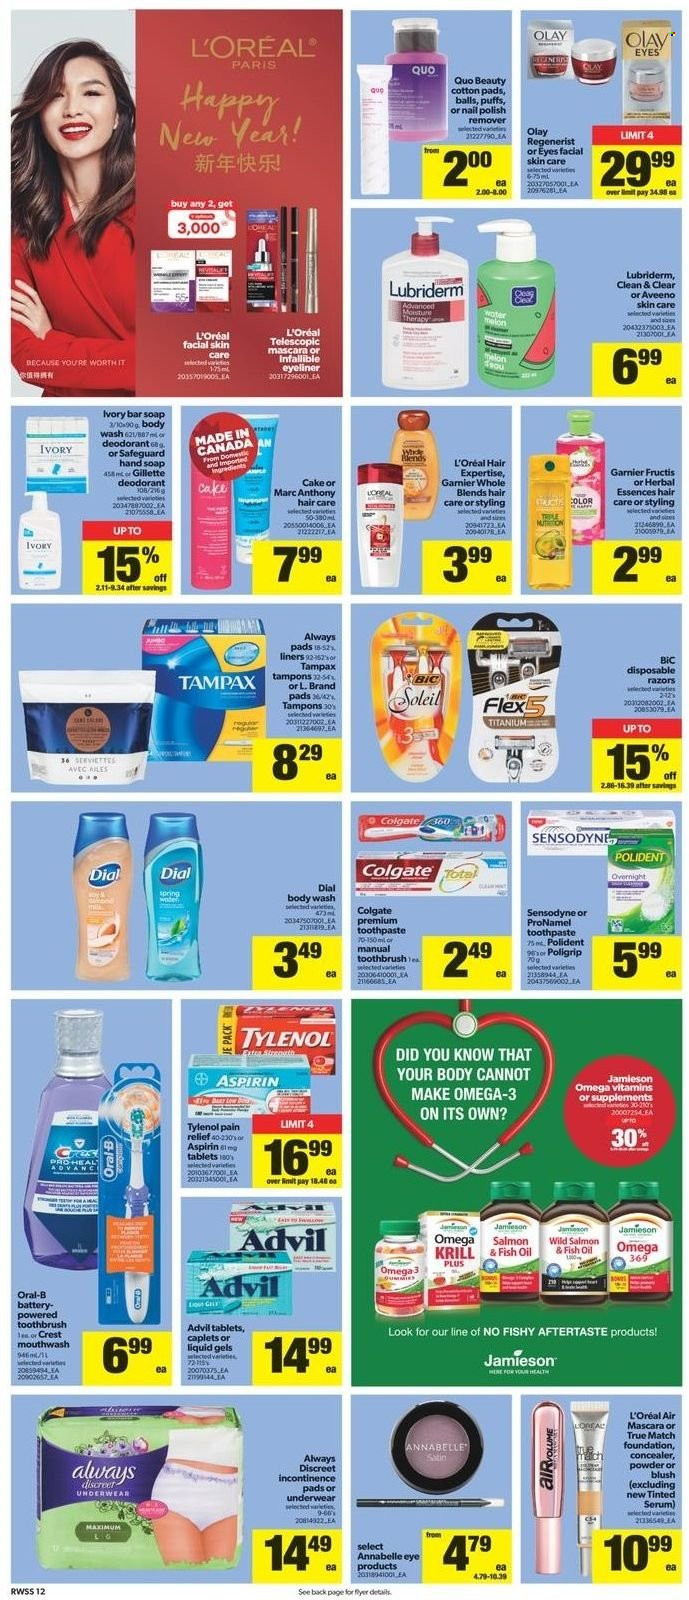 thumbnail - Real Canadian Superstore Flyer - January 20, 2022 - January 26, 2022 - Sales products - cake, puffs, watermelon, melons, salmon, milk, oil, Aveeno, body wash, hand soap, soap bar, Dial, soap, toothbrush, toothpaste, mouthwash, Polident, Crest, Always pads, Always Discreet, tampons, L’Oréal, serum, Olay, Clean & Clear, Herbal Essences, Fructis, Lubriderm, anti-perspirant, BIC, disposable razor, polish, corrector, mascara, eyeliner, battery, pain relief, fish oil, Tylenol, Omega-3, Advil Rapid, aspirin, Colgate, Garnier, Gillette, Tampax, Oral-B, Sensodyne, deodorant. Page 12.